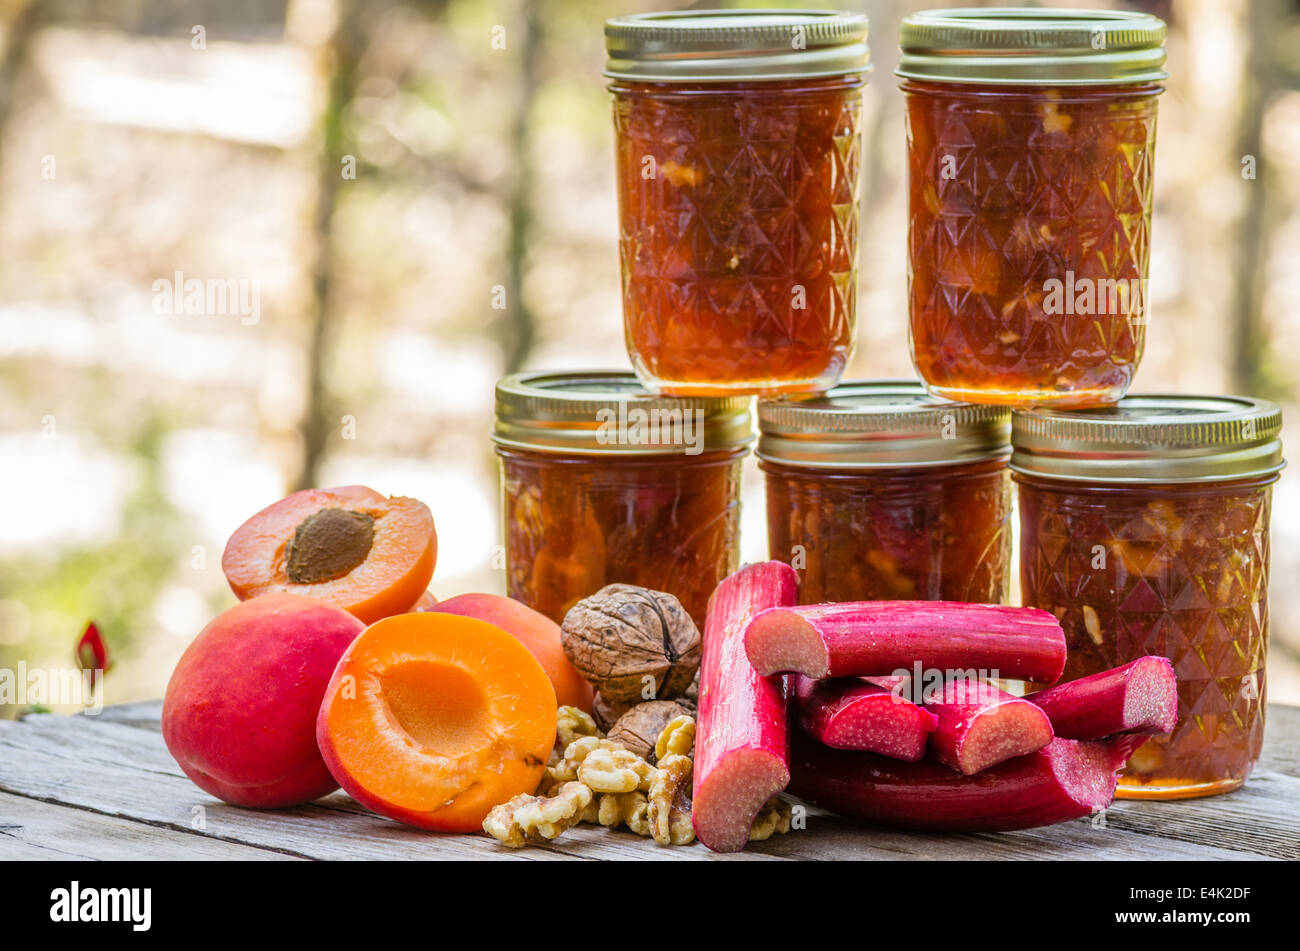 Homemade apricot rhubarb conserve with walnuts Stock Photo